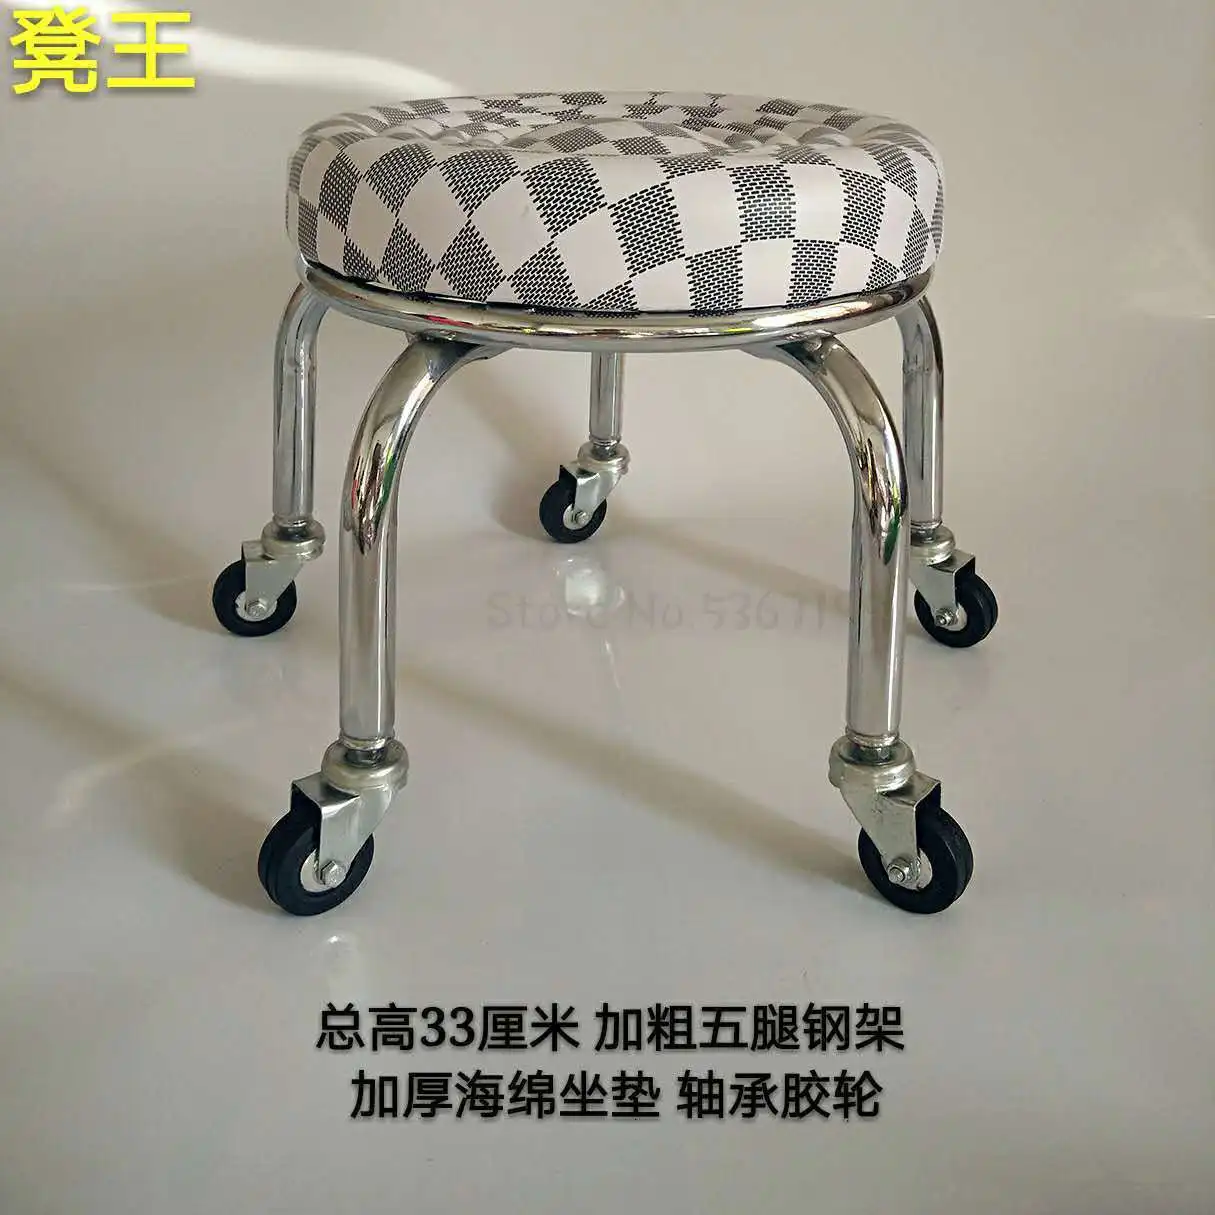 Pulley Stool Beauty Sewing Construction Stool Round Bench Stool with Doll Stool Child Toddler Stool Pulley Stool Squat Stool